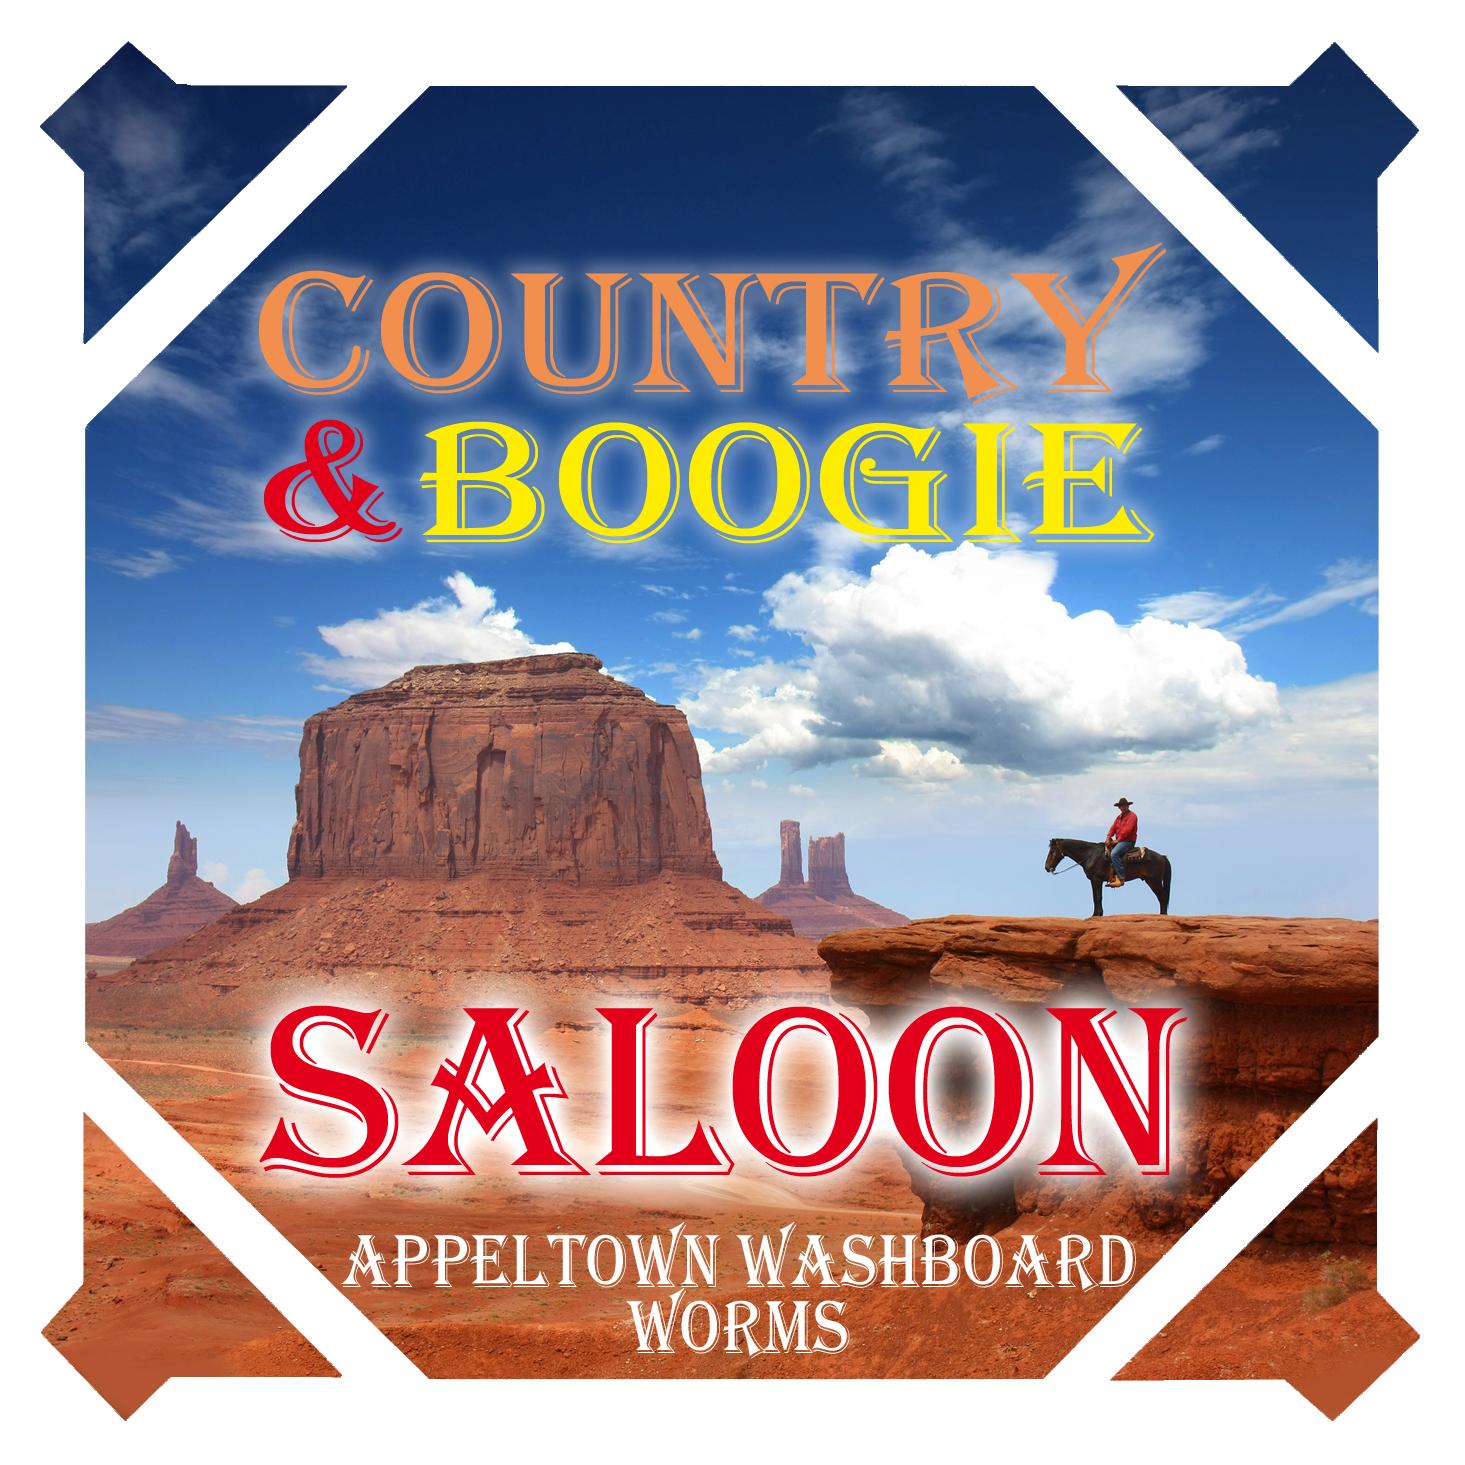 Appletown Washboard Worms - Country & Boogie Saloon